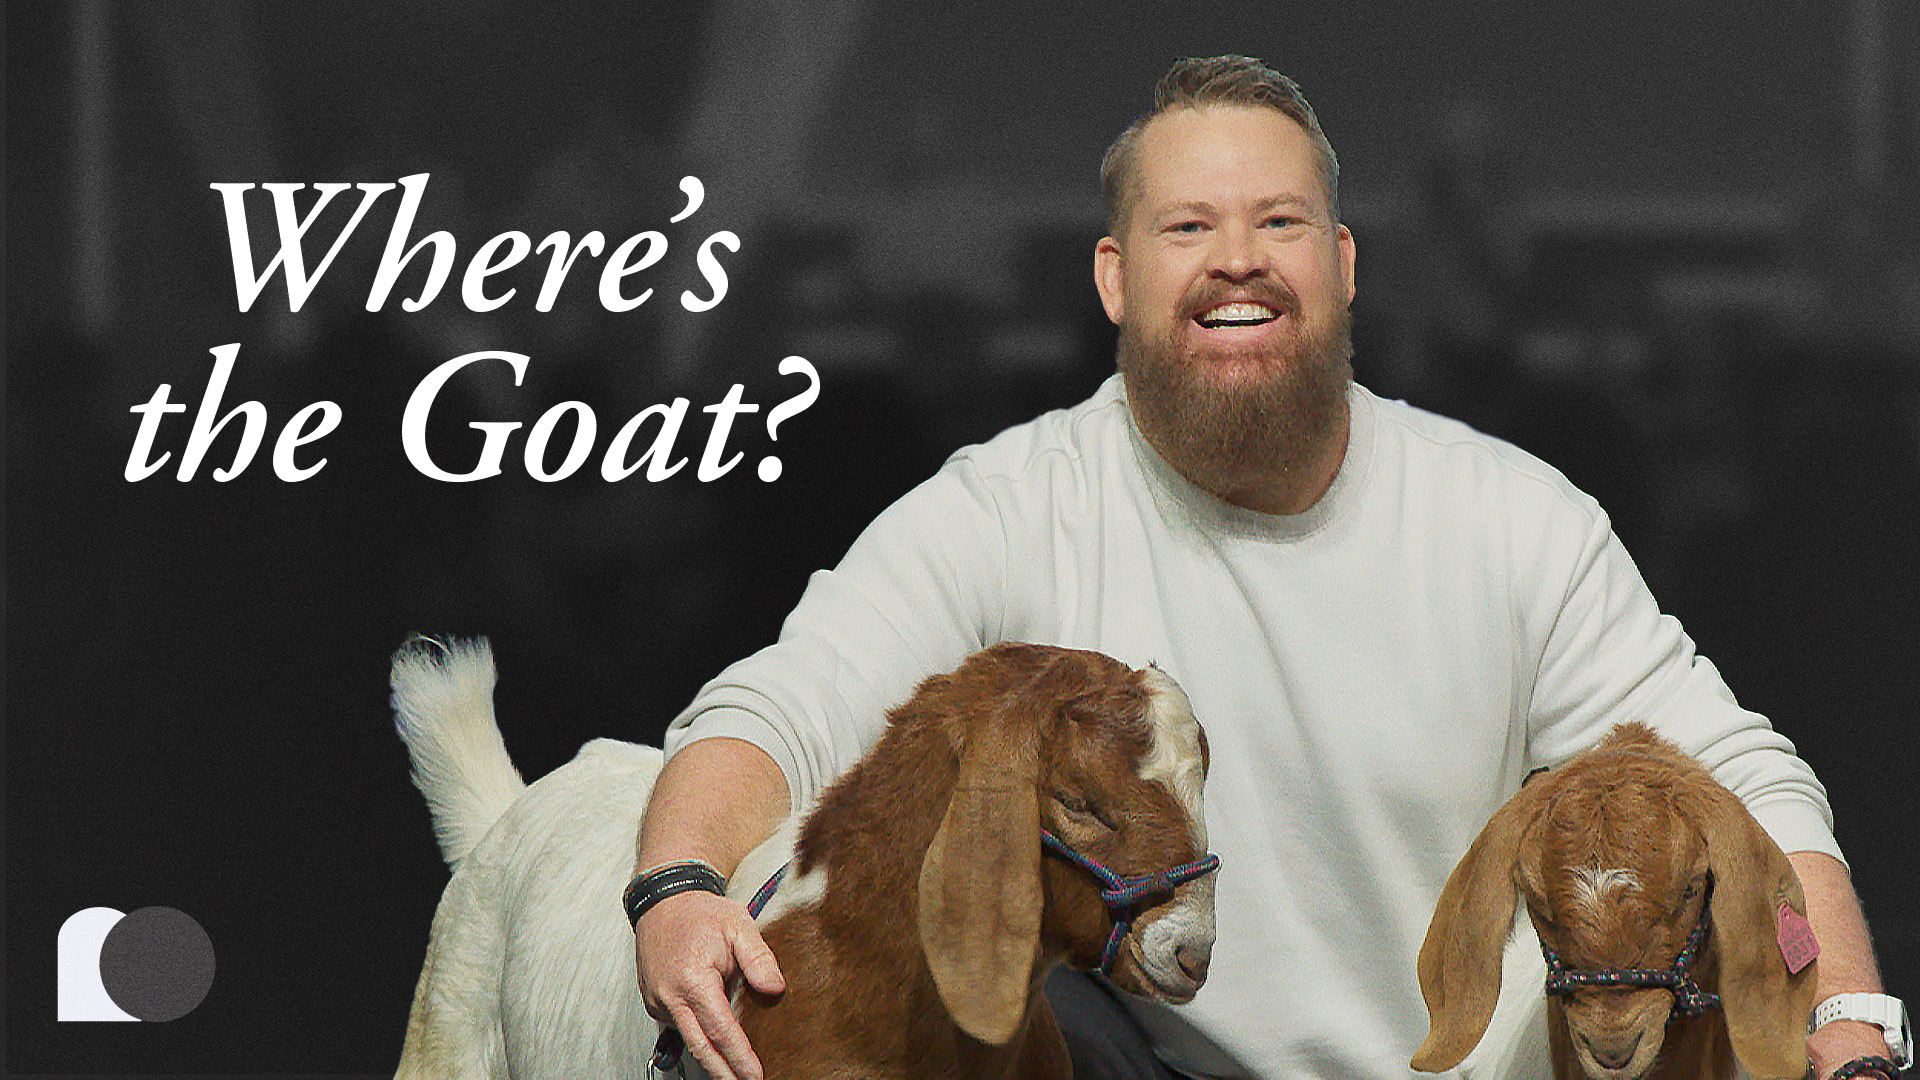 Where's the Goat?